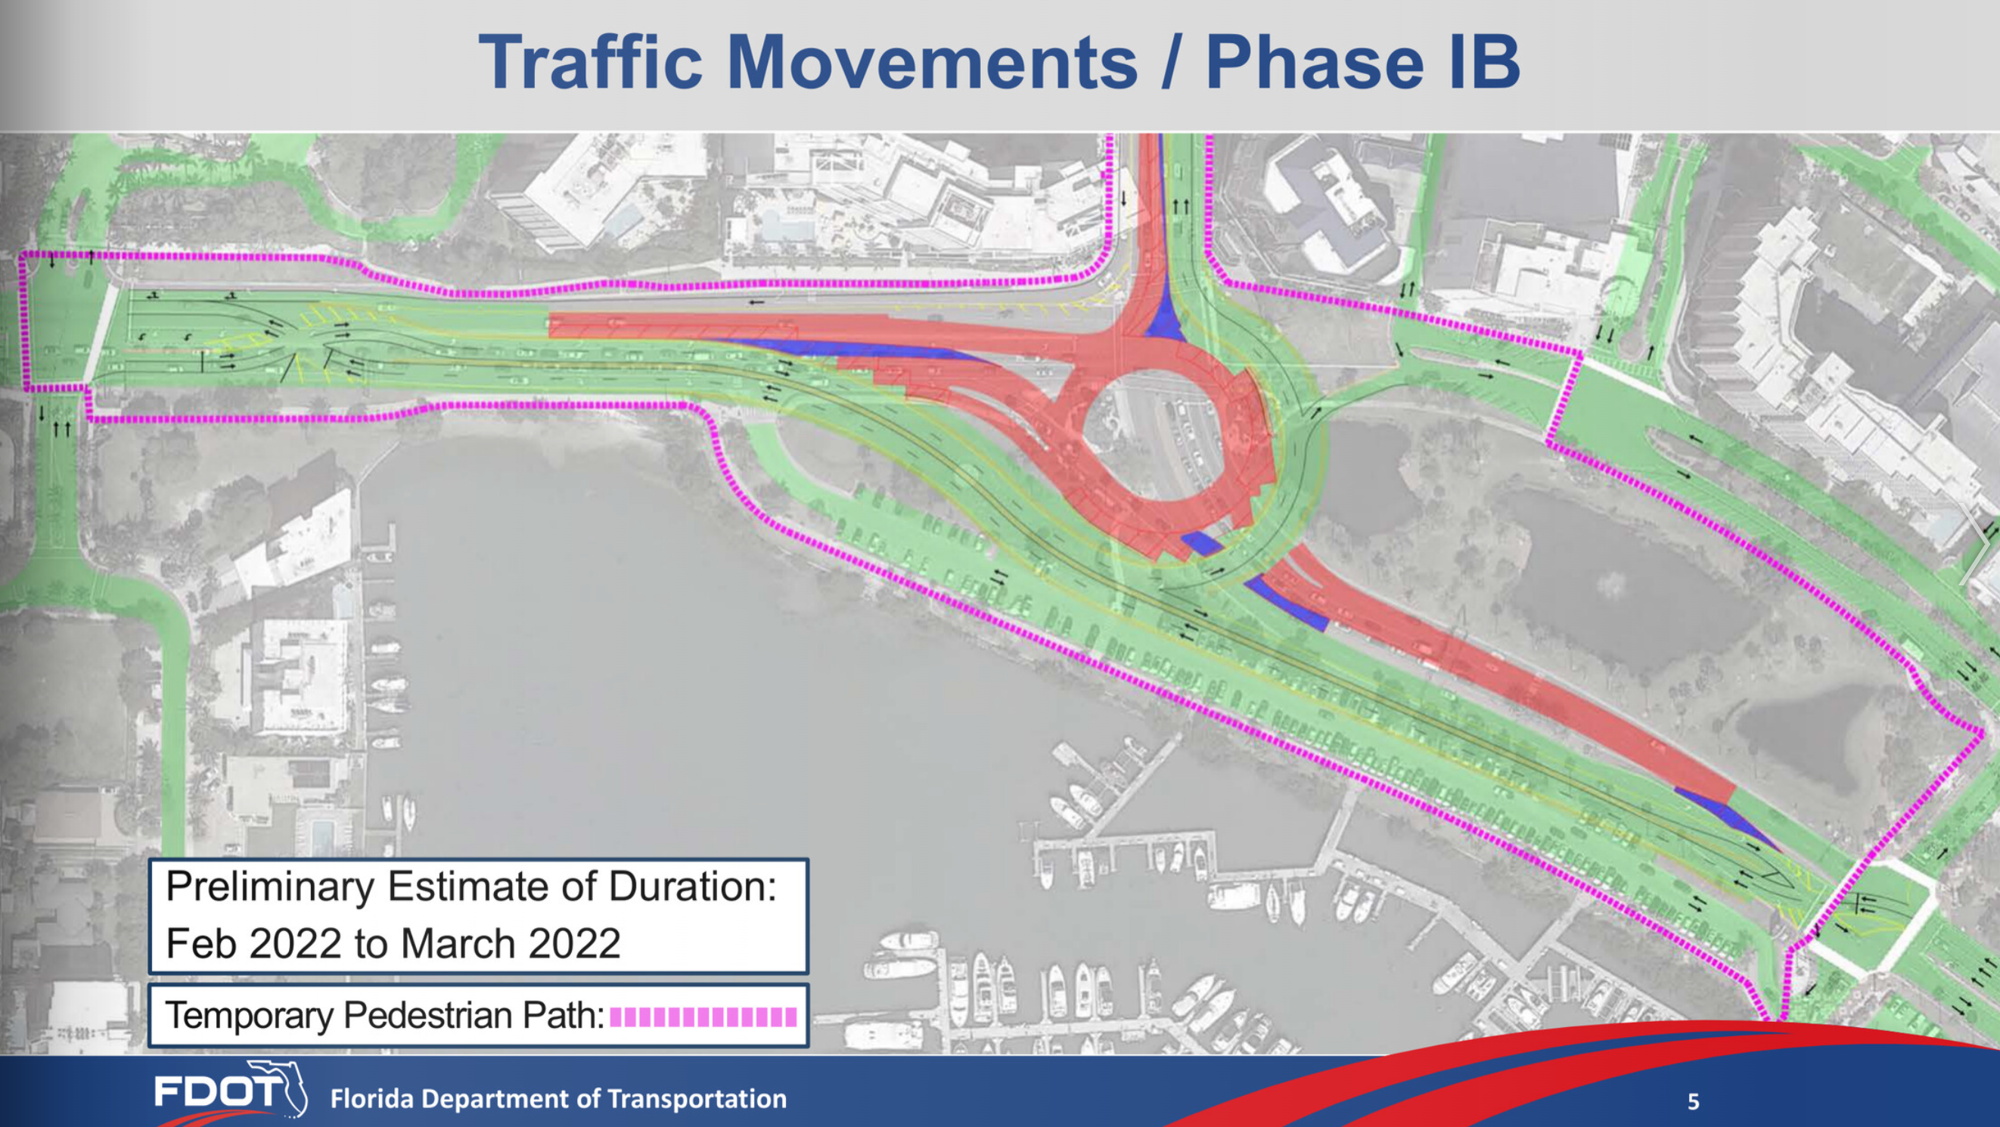 FDOT is expected to be in Phase IB of the roundabout project from February to March. Map courtesy of FDOT.